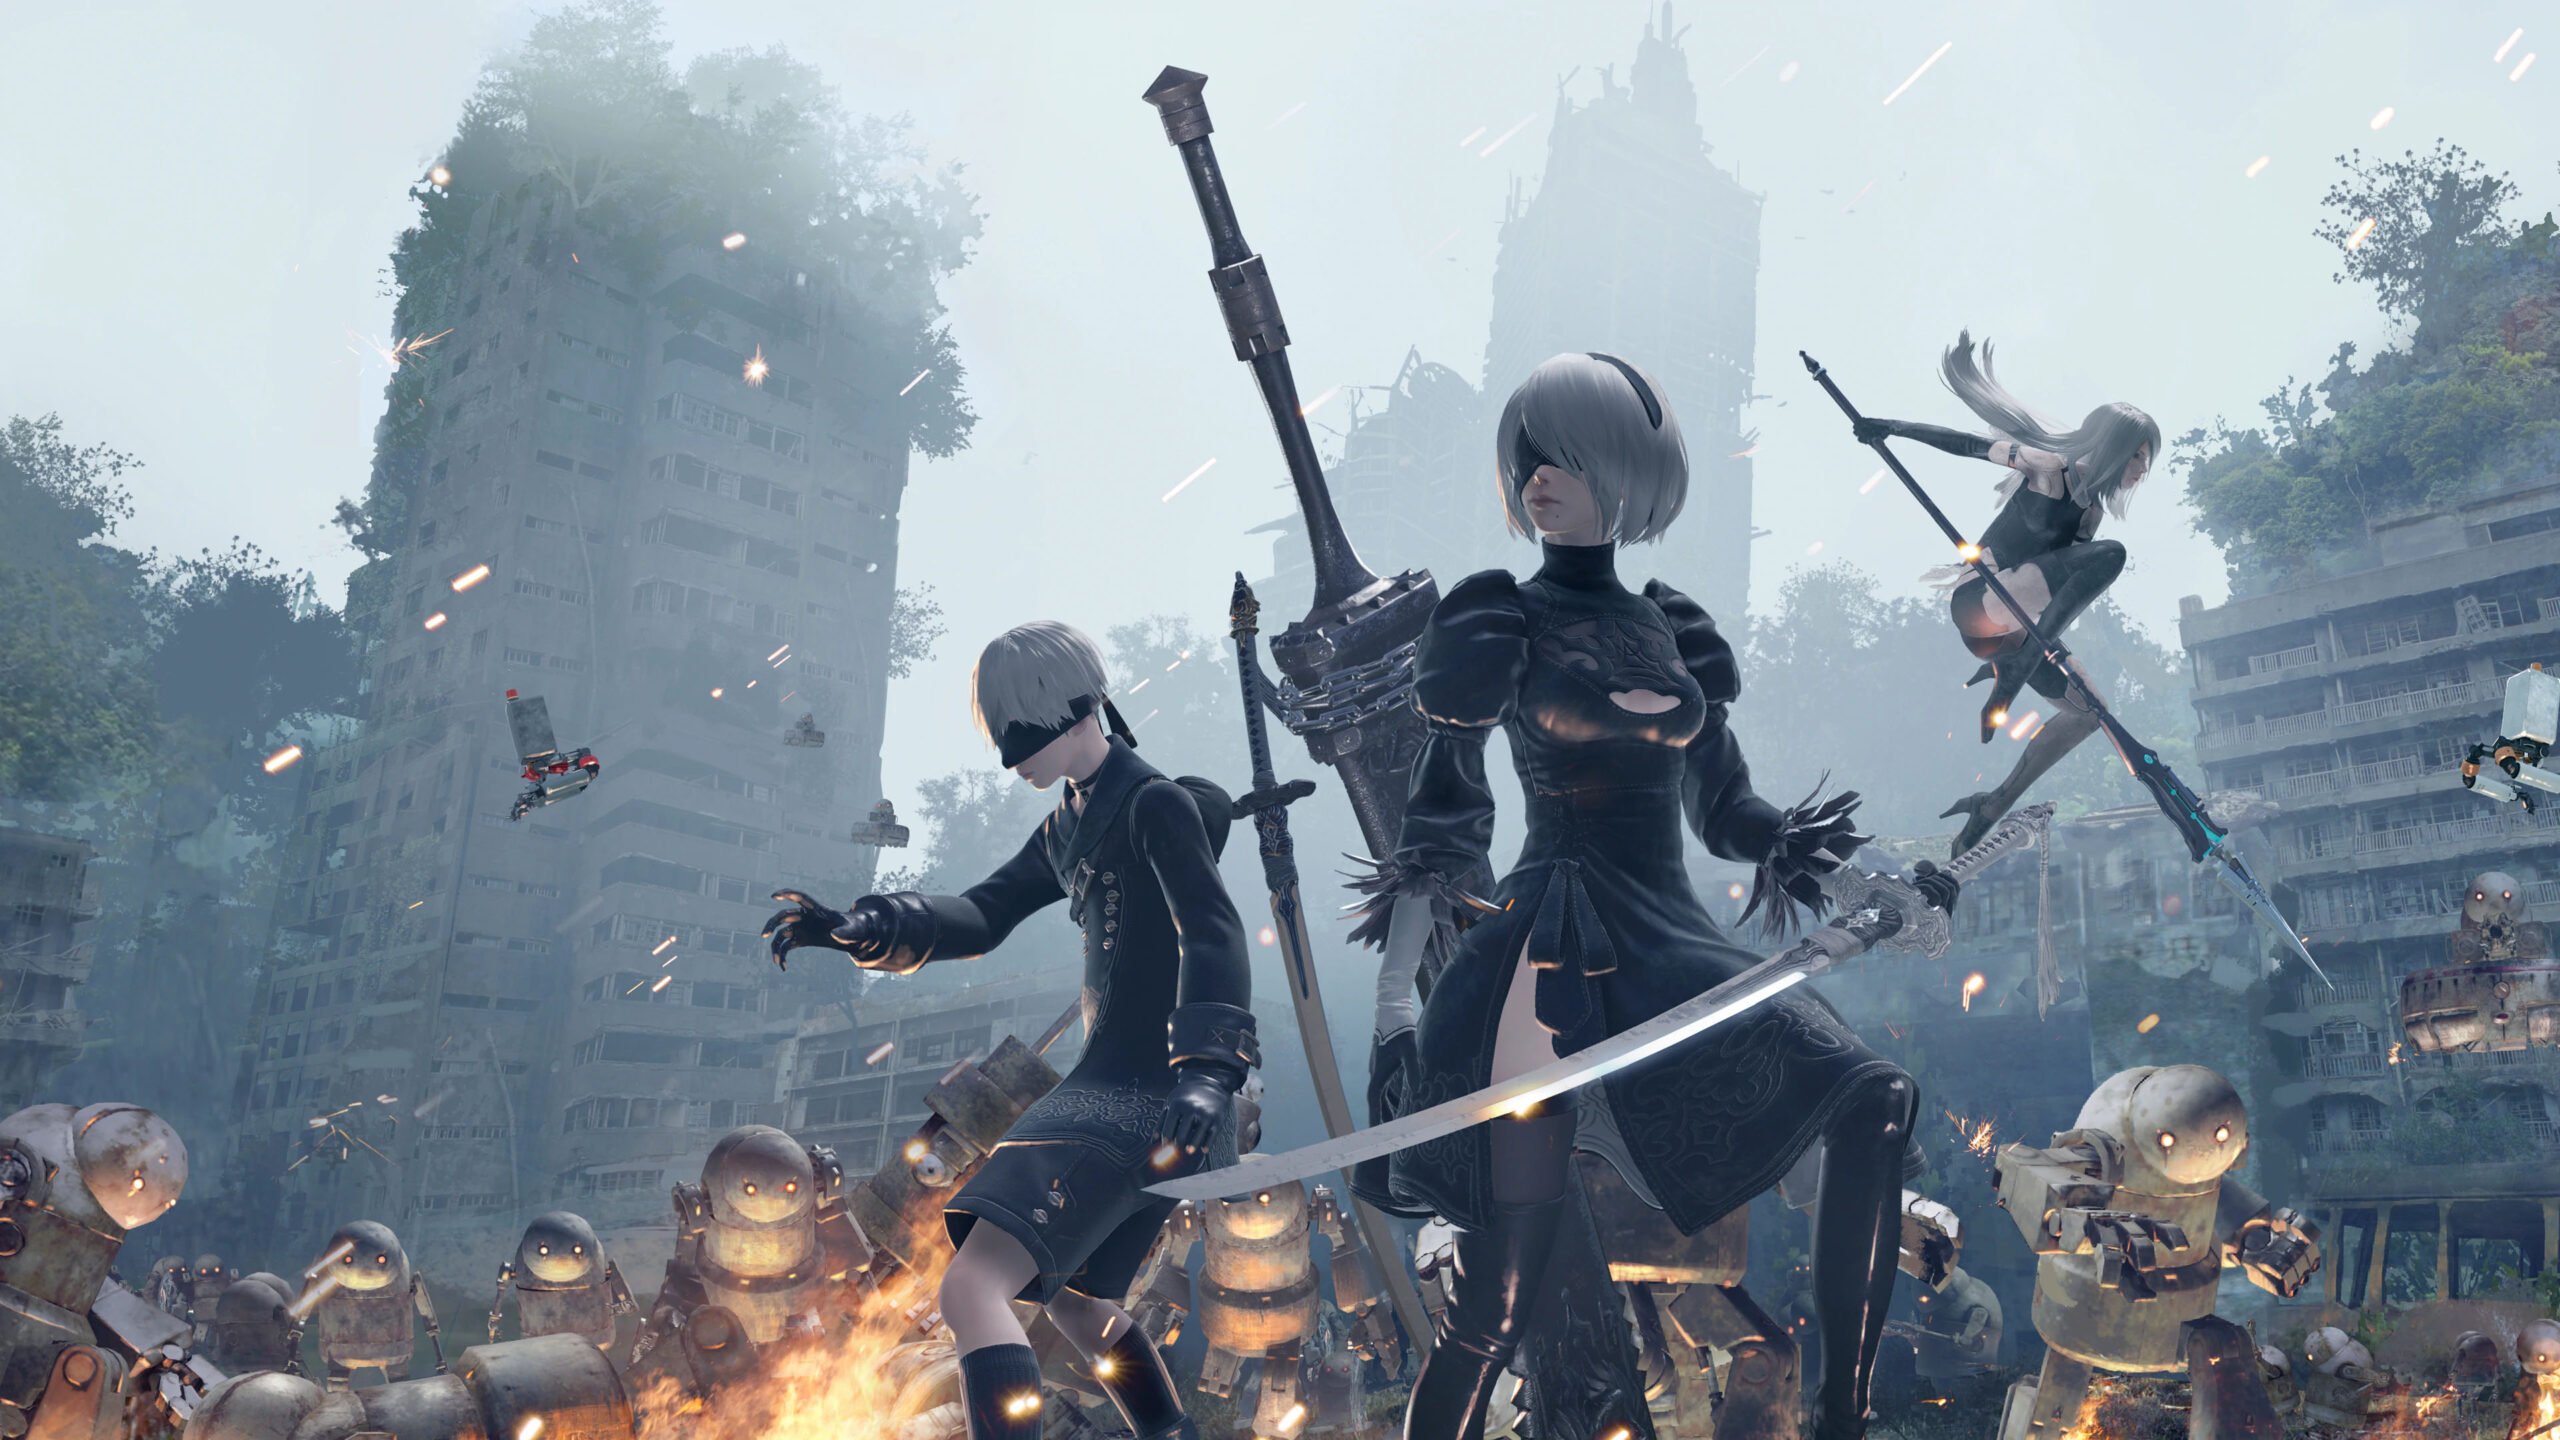 NieR: Automata – Death is Your Beginning Launch Trailer